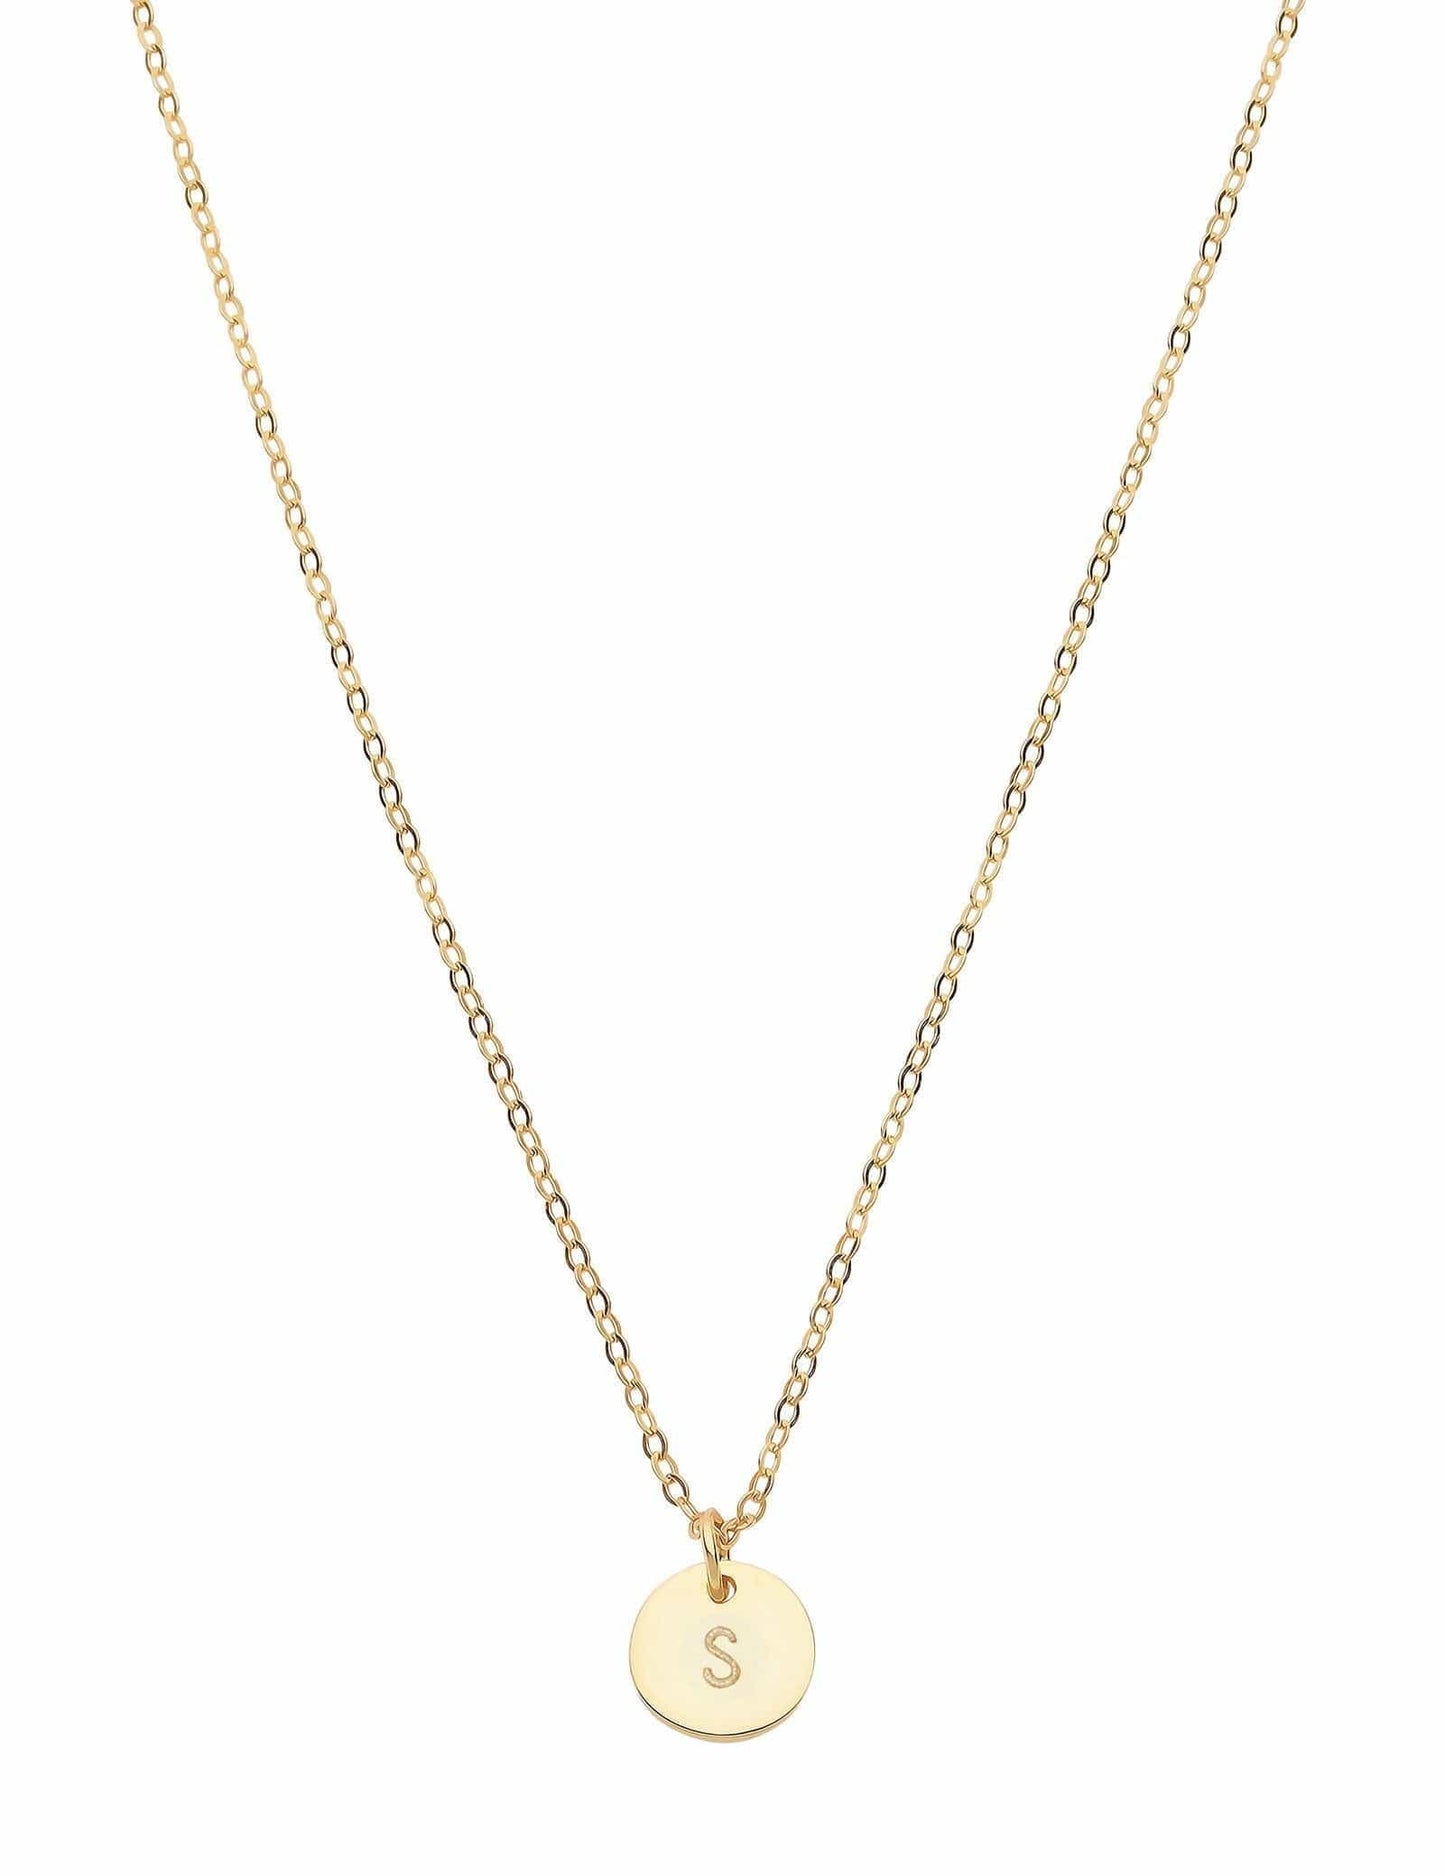 Dear Addison Yellow Gold Letter S Necklace